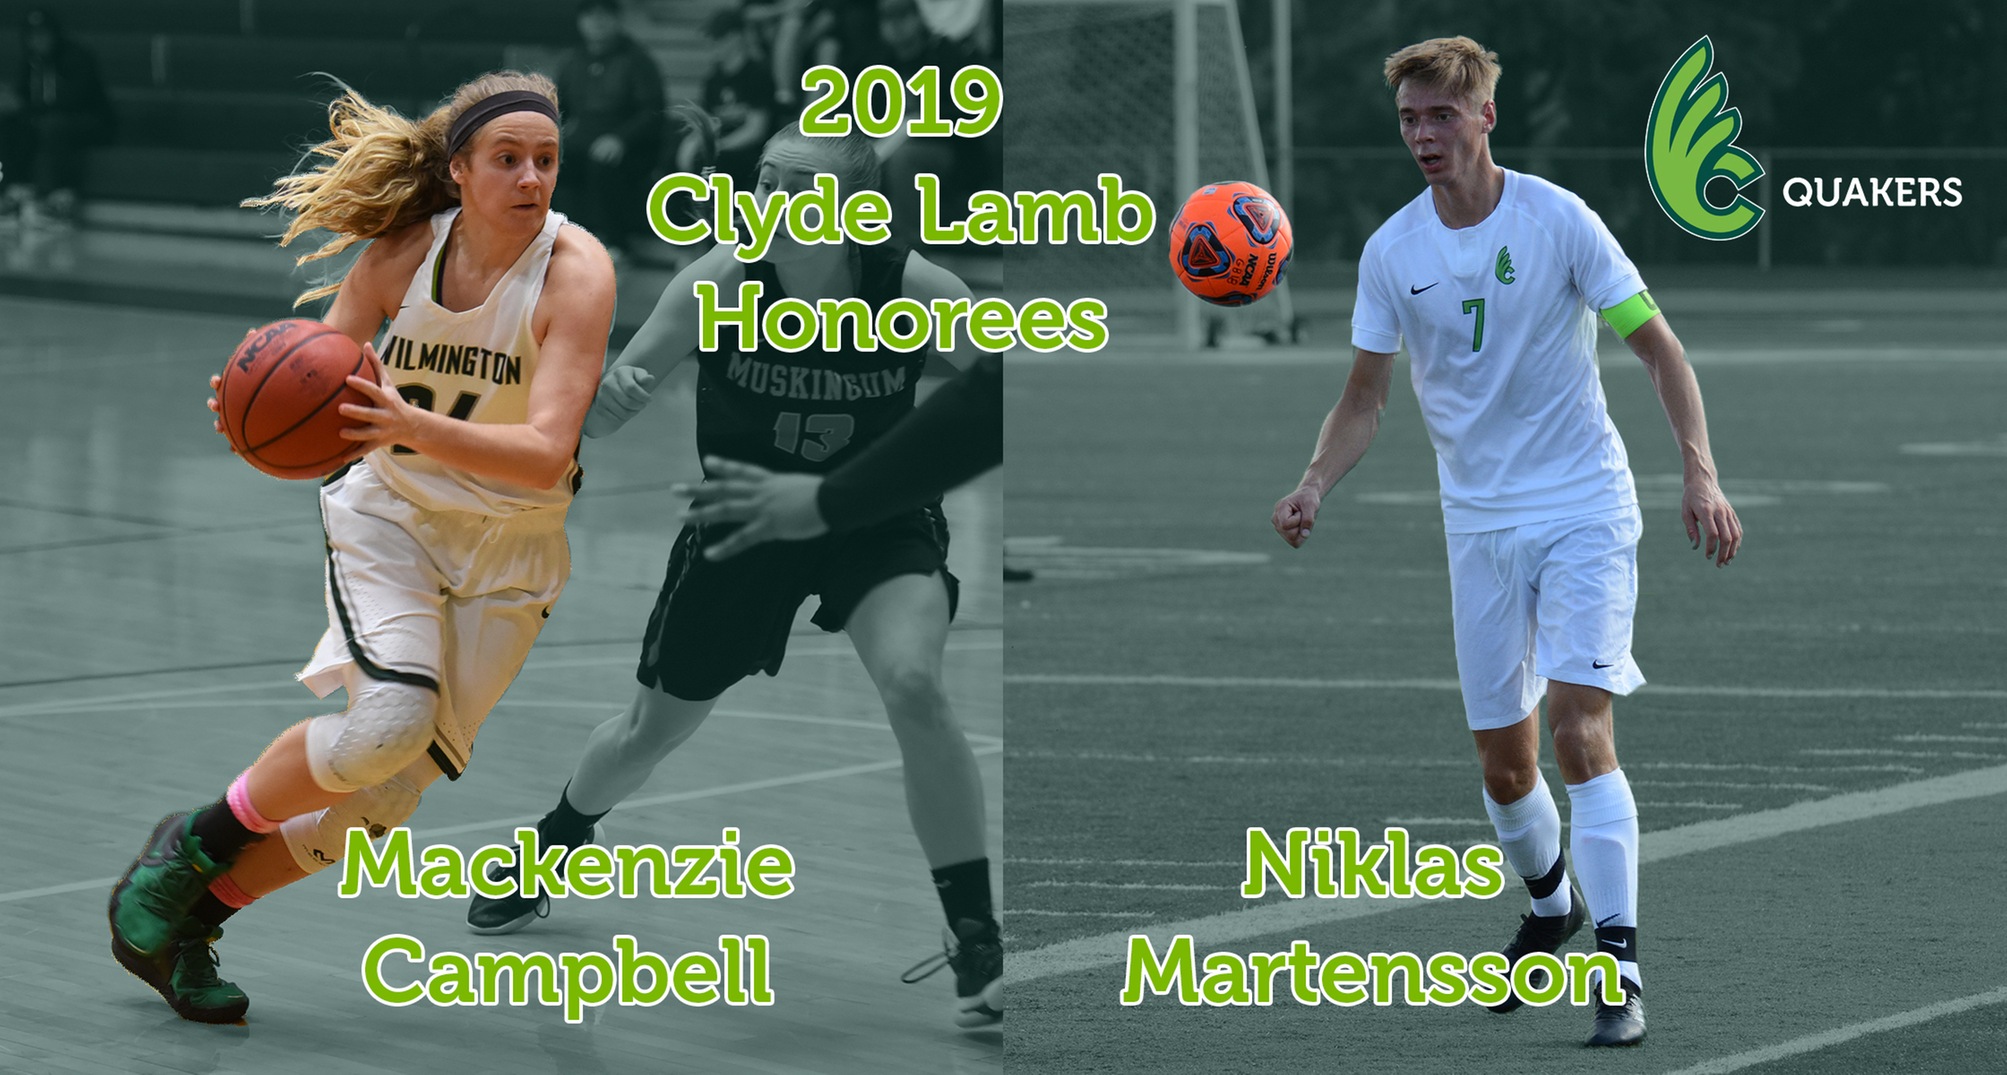 Campbell and Martensson To Receive Clyde Lamb Awards on May 13